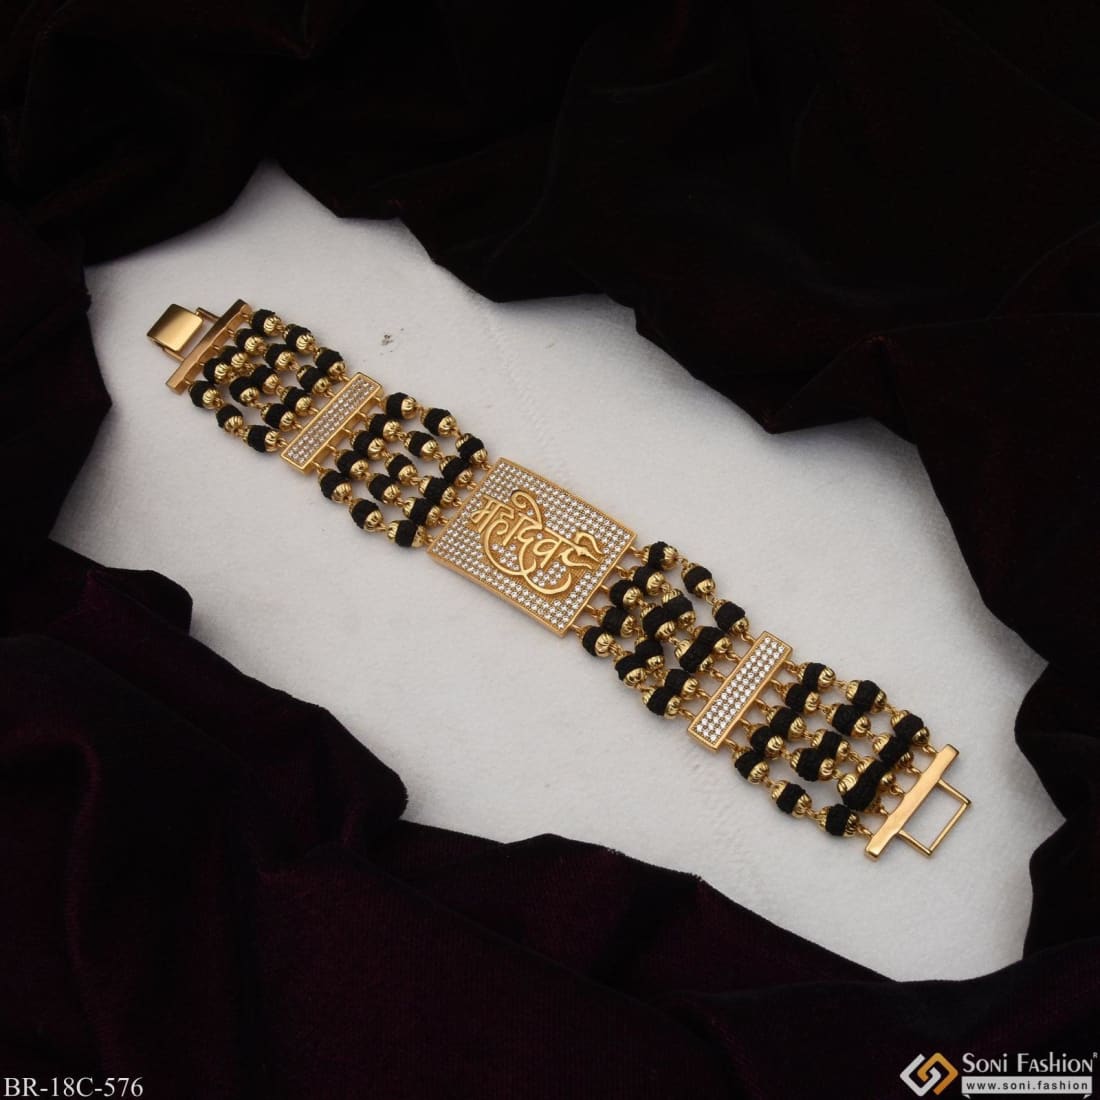 18k Yellow Gold Filled Filigree 3 Flower Mahadev Bracelet Perfect For  Weddings, Parties, And Everyday Wear Stunning Gift For Women From  Blingfashion, $11.17 | DHgate.Com